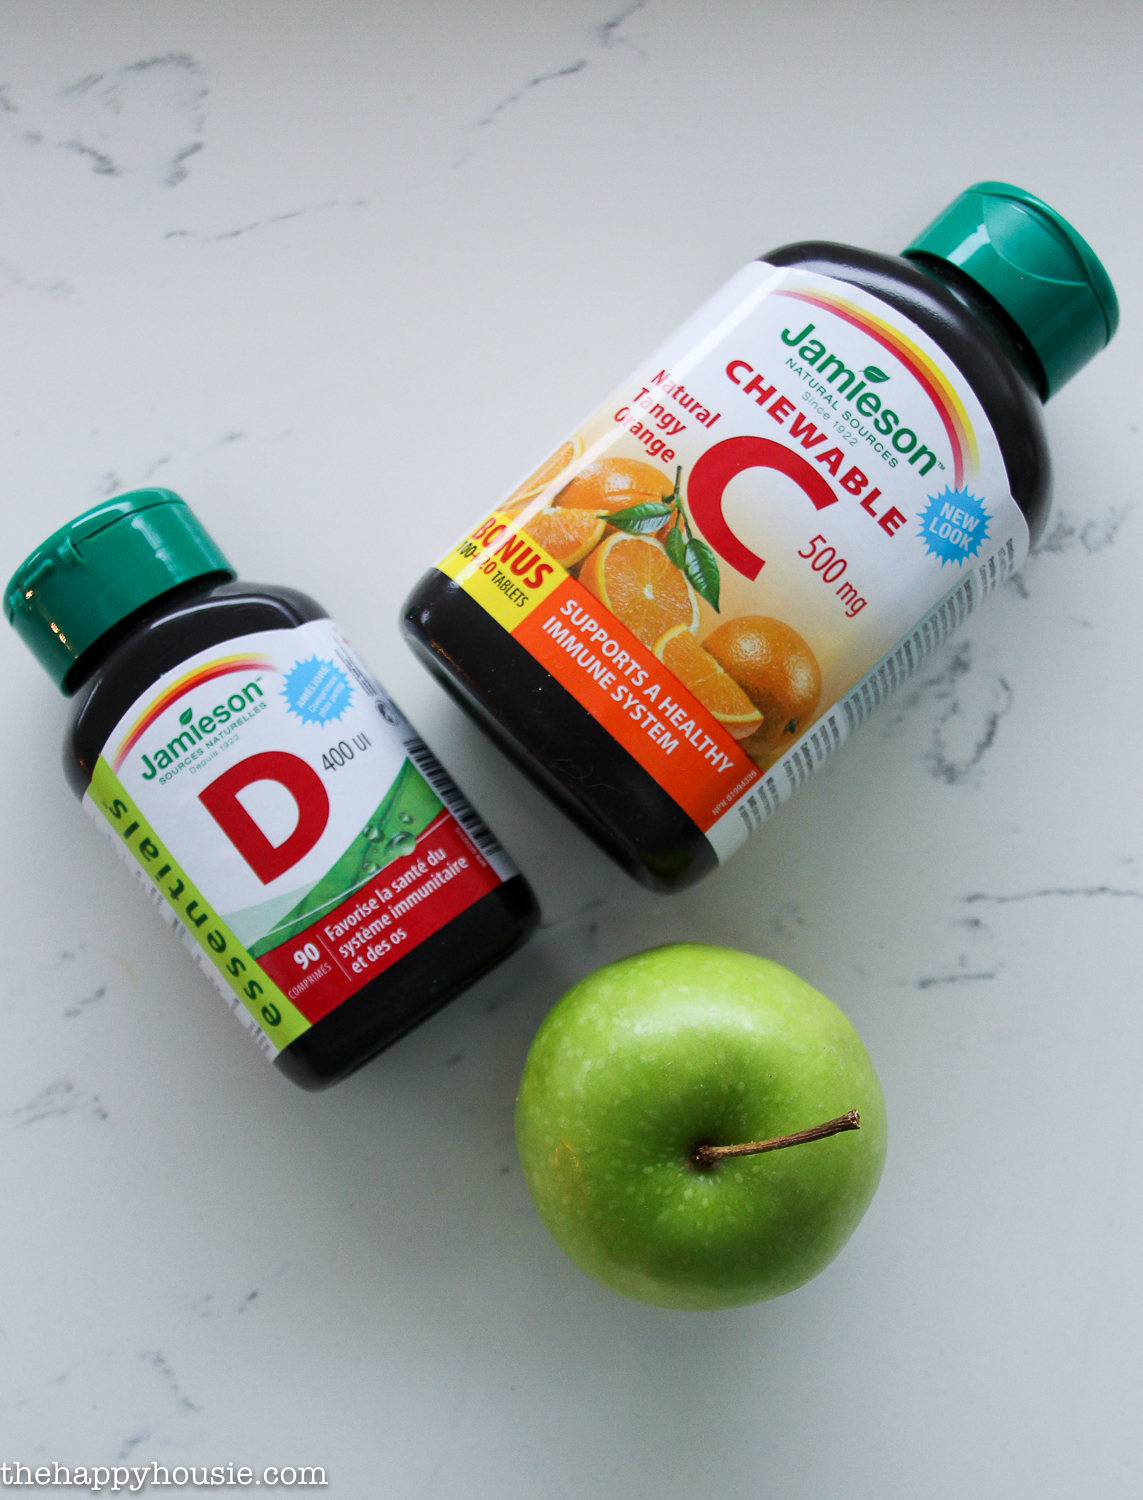 A bottle of vitamin C and D and a green apple on the counter.